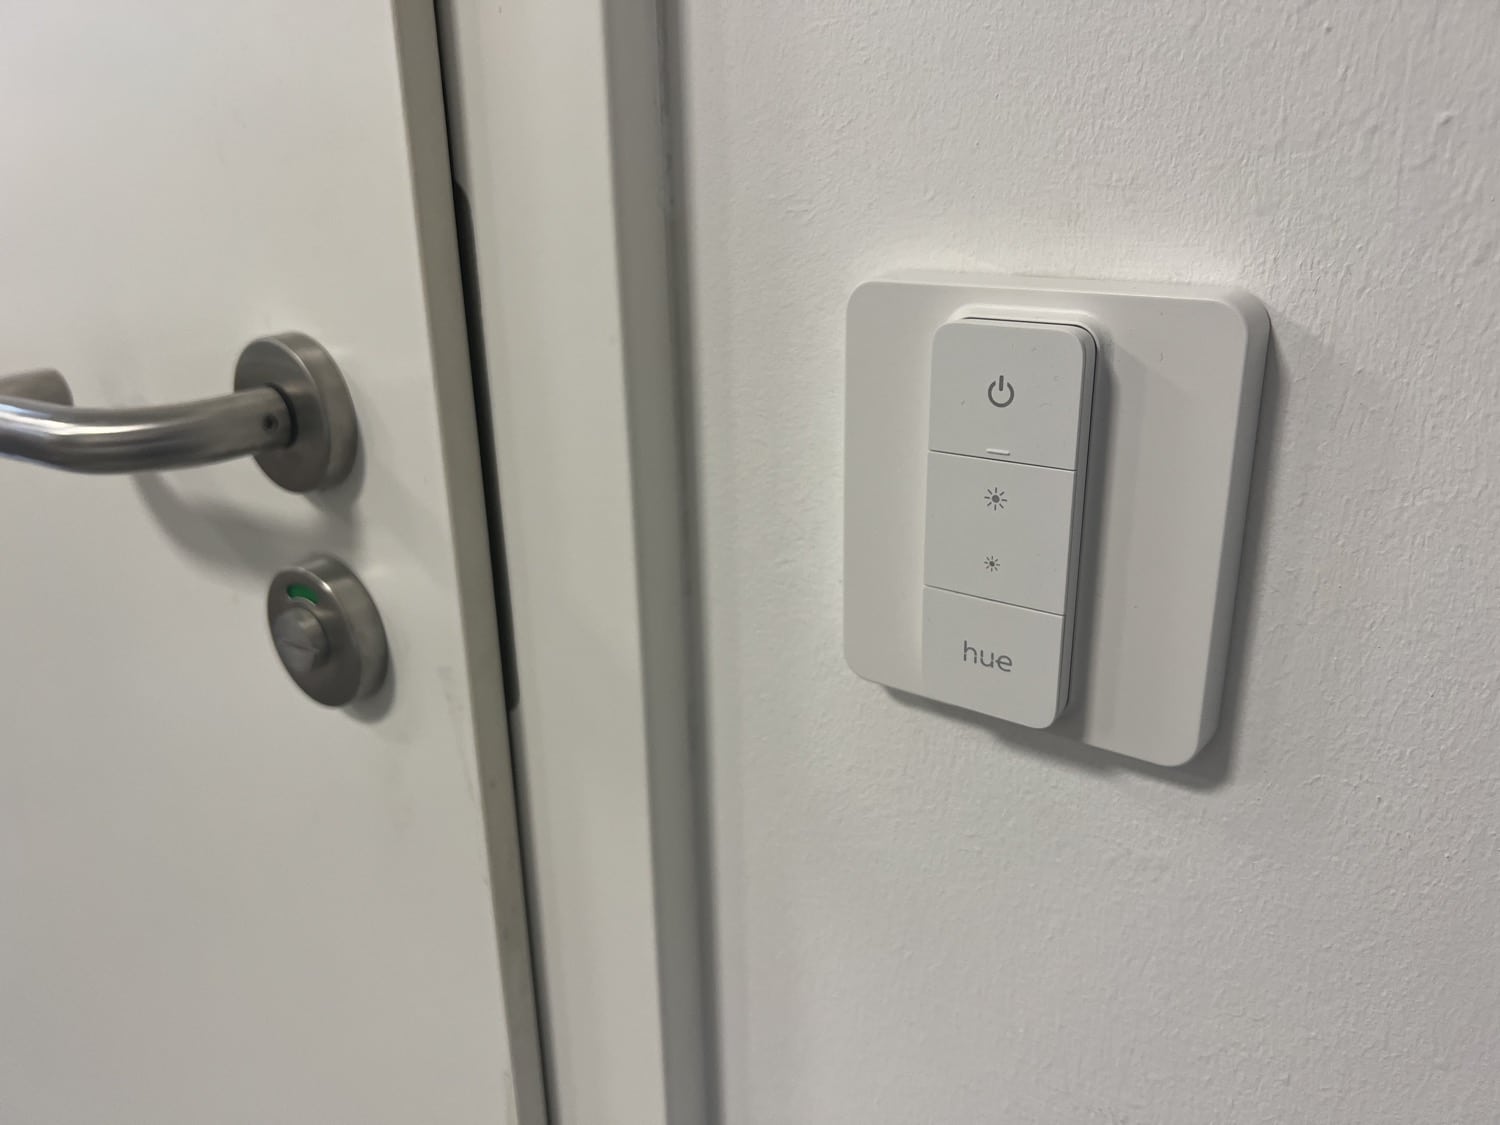 Hueblog: Without removing the light switch: Handy frame for the new dimmer switch